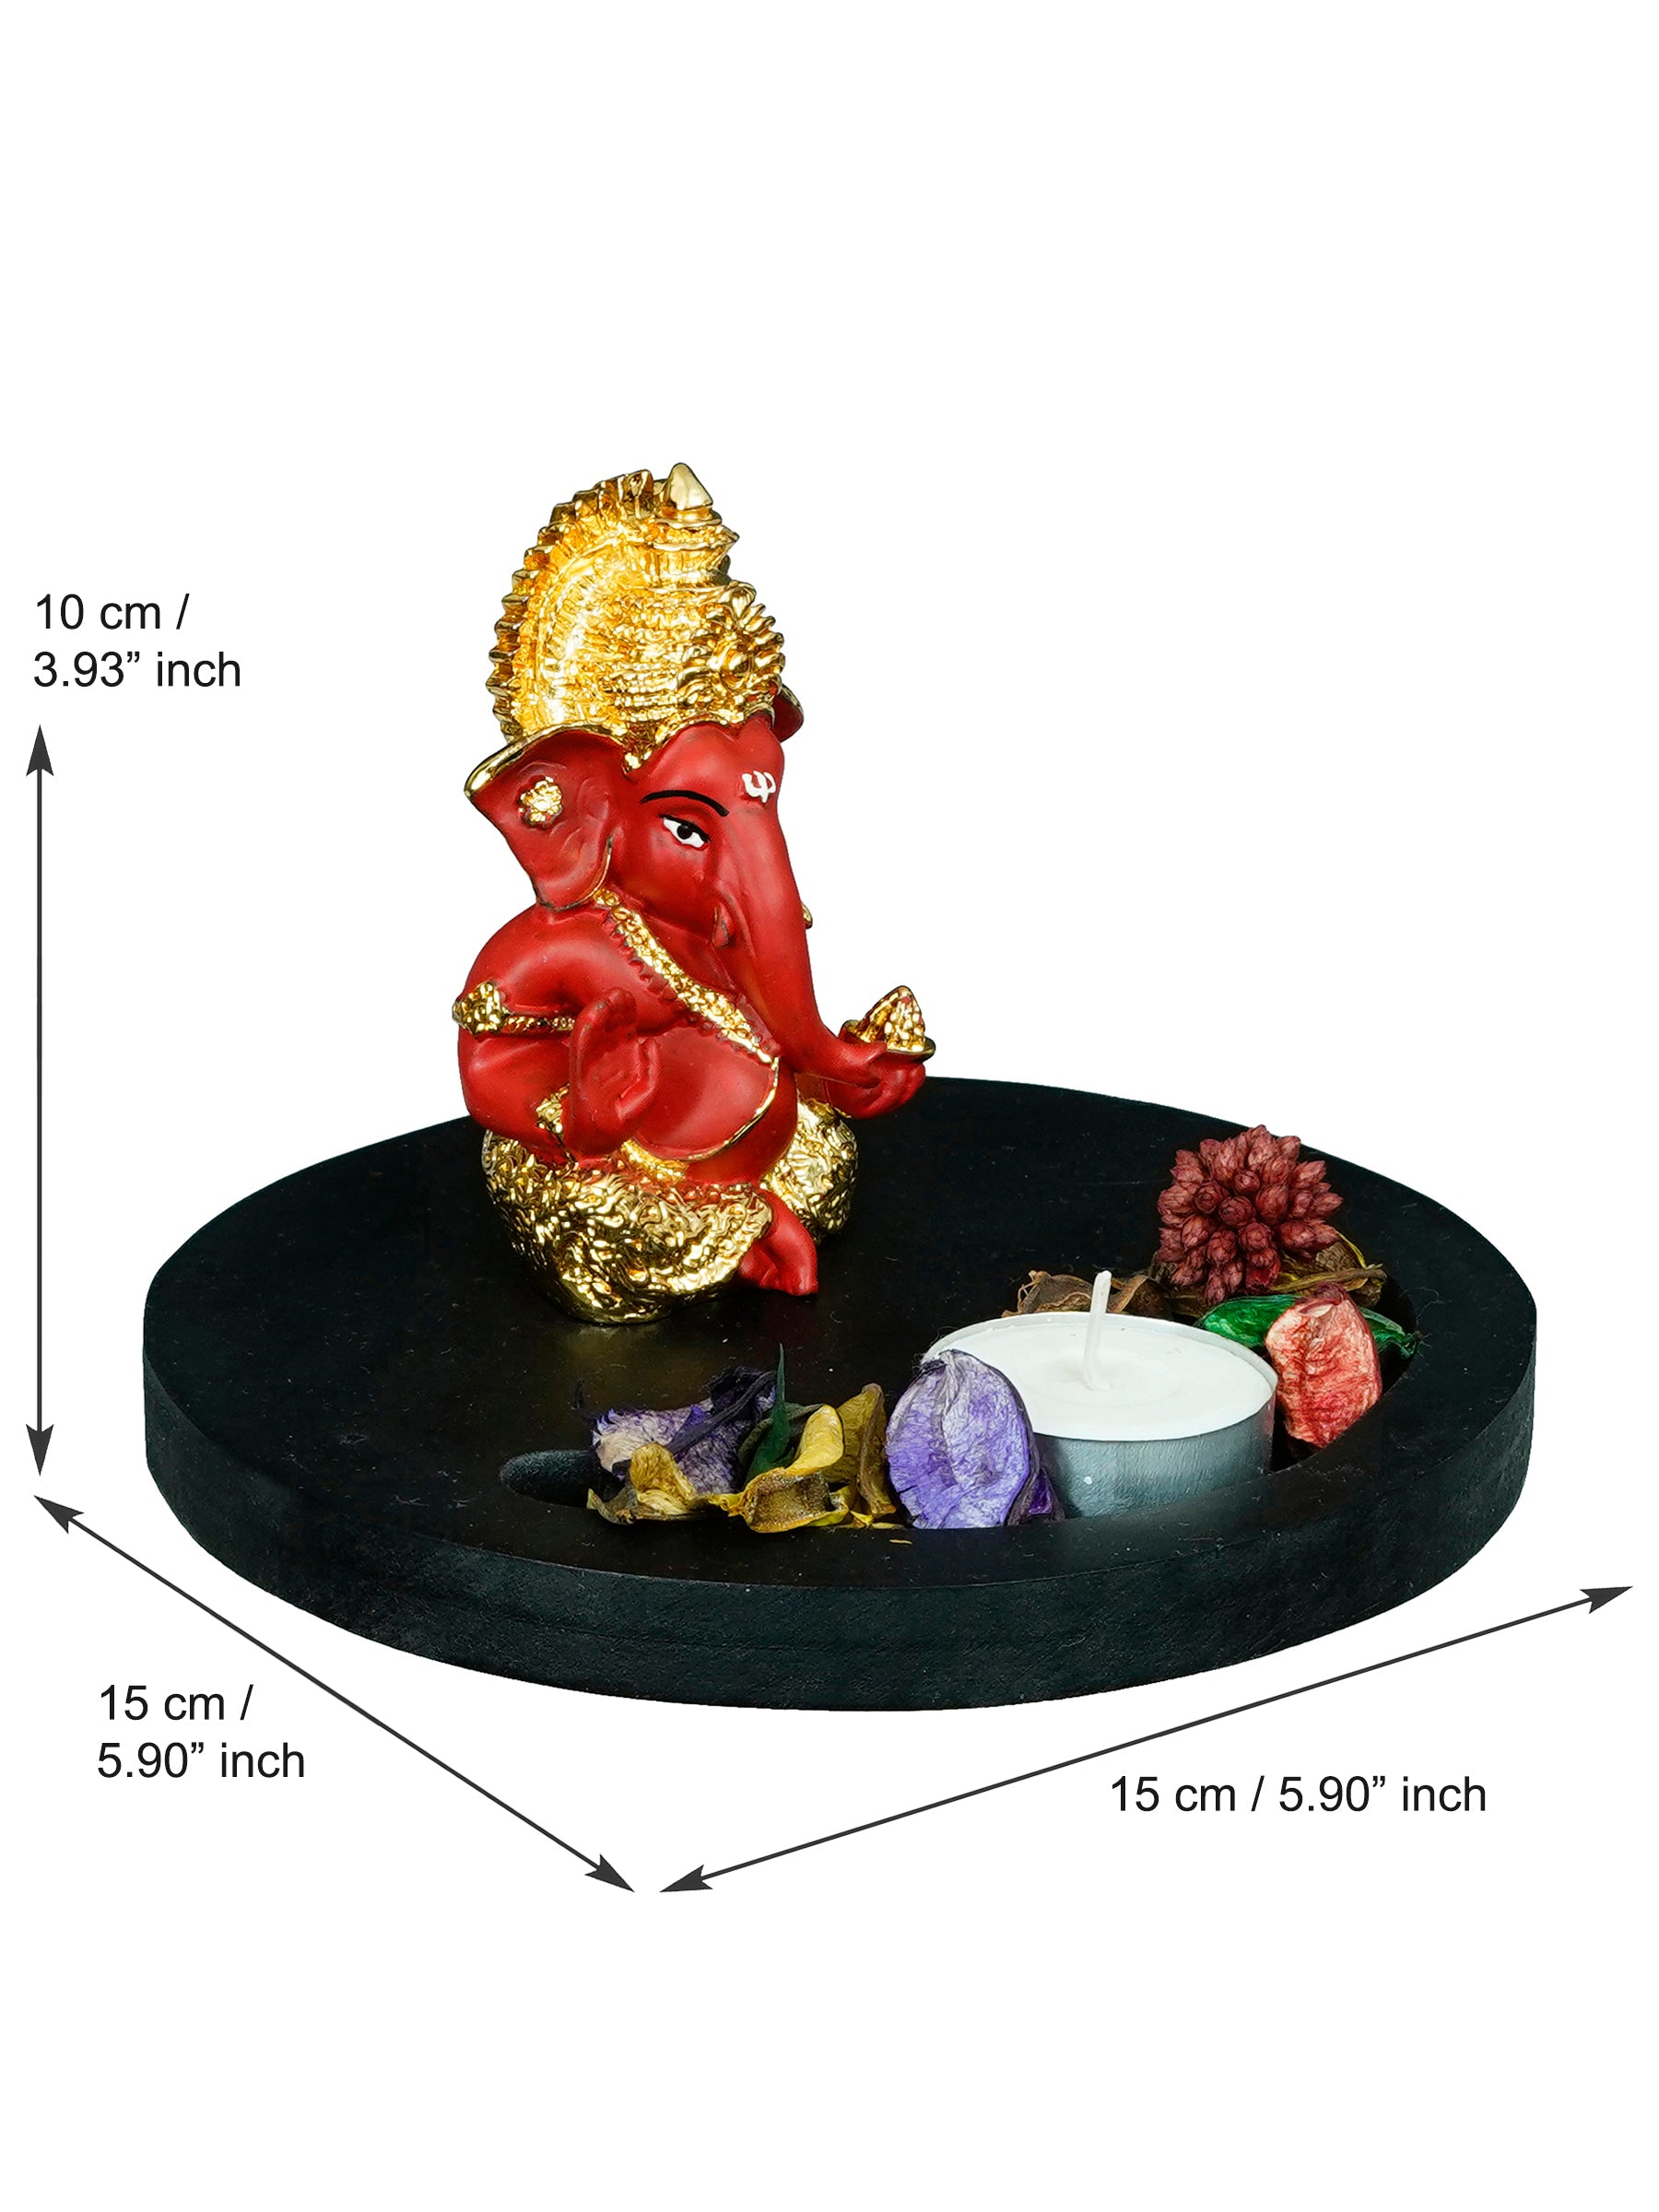 Polyresin Gold Plated Red Ganesha Idol on Wooden Base Tea Light Candle holder 3